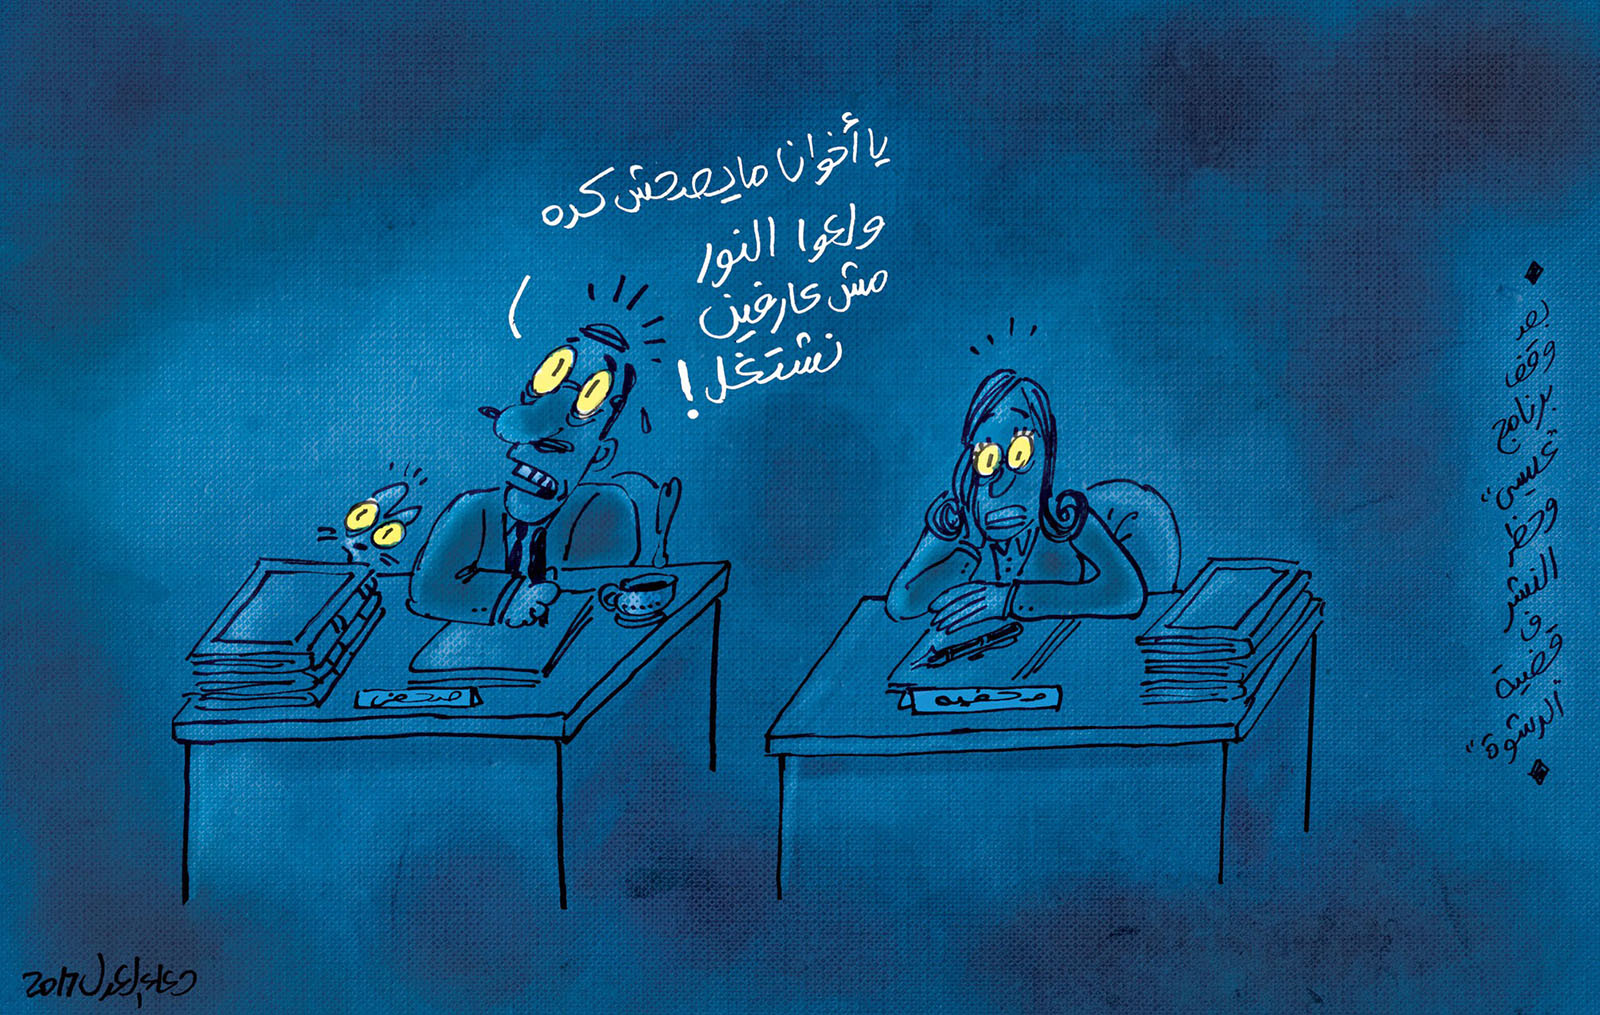 Doaa's caricature about working in the darkness. 